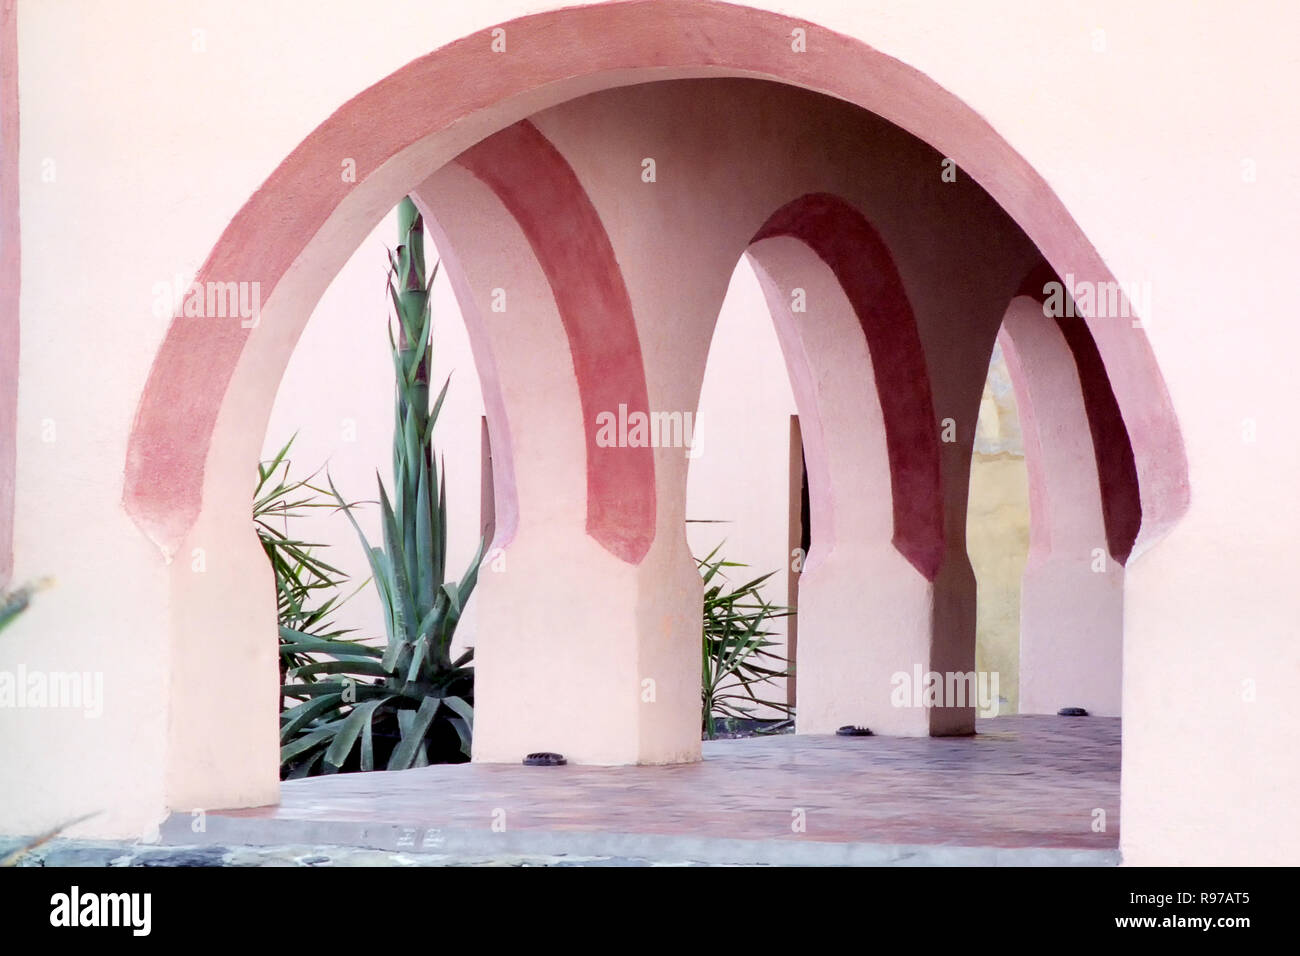 MONTERREY, NL/MEXICO - JUN 20, 2004: Arches at the Bishop's museum Stock Photo